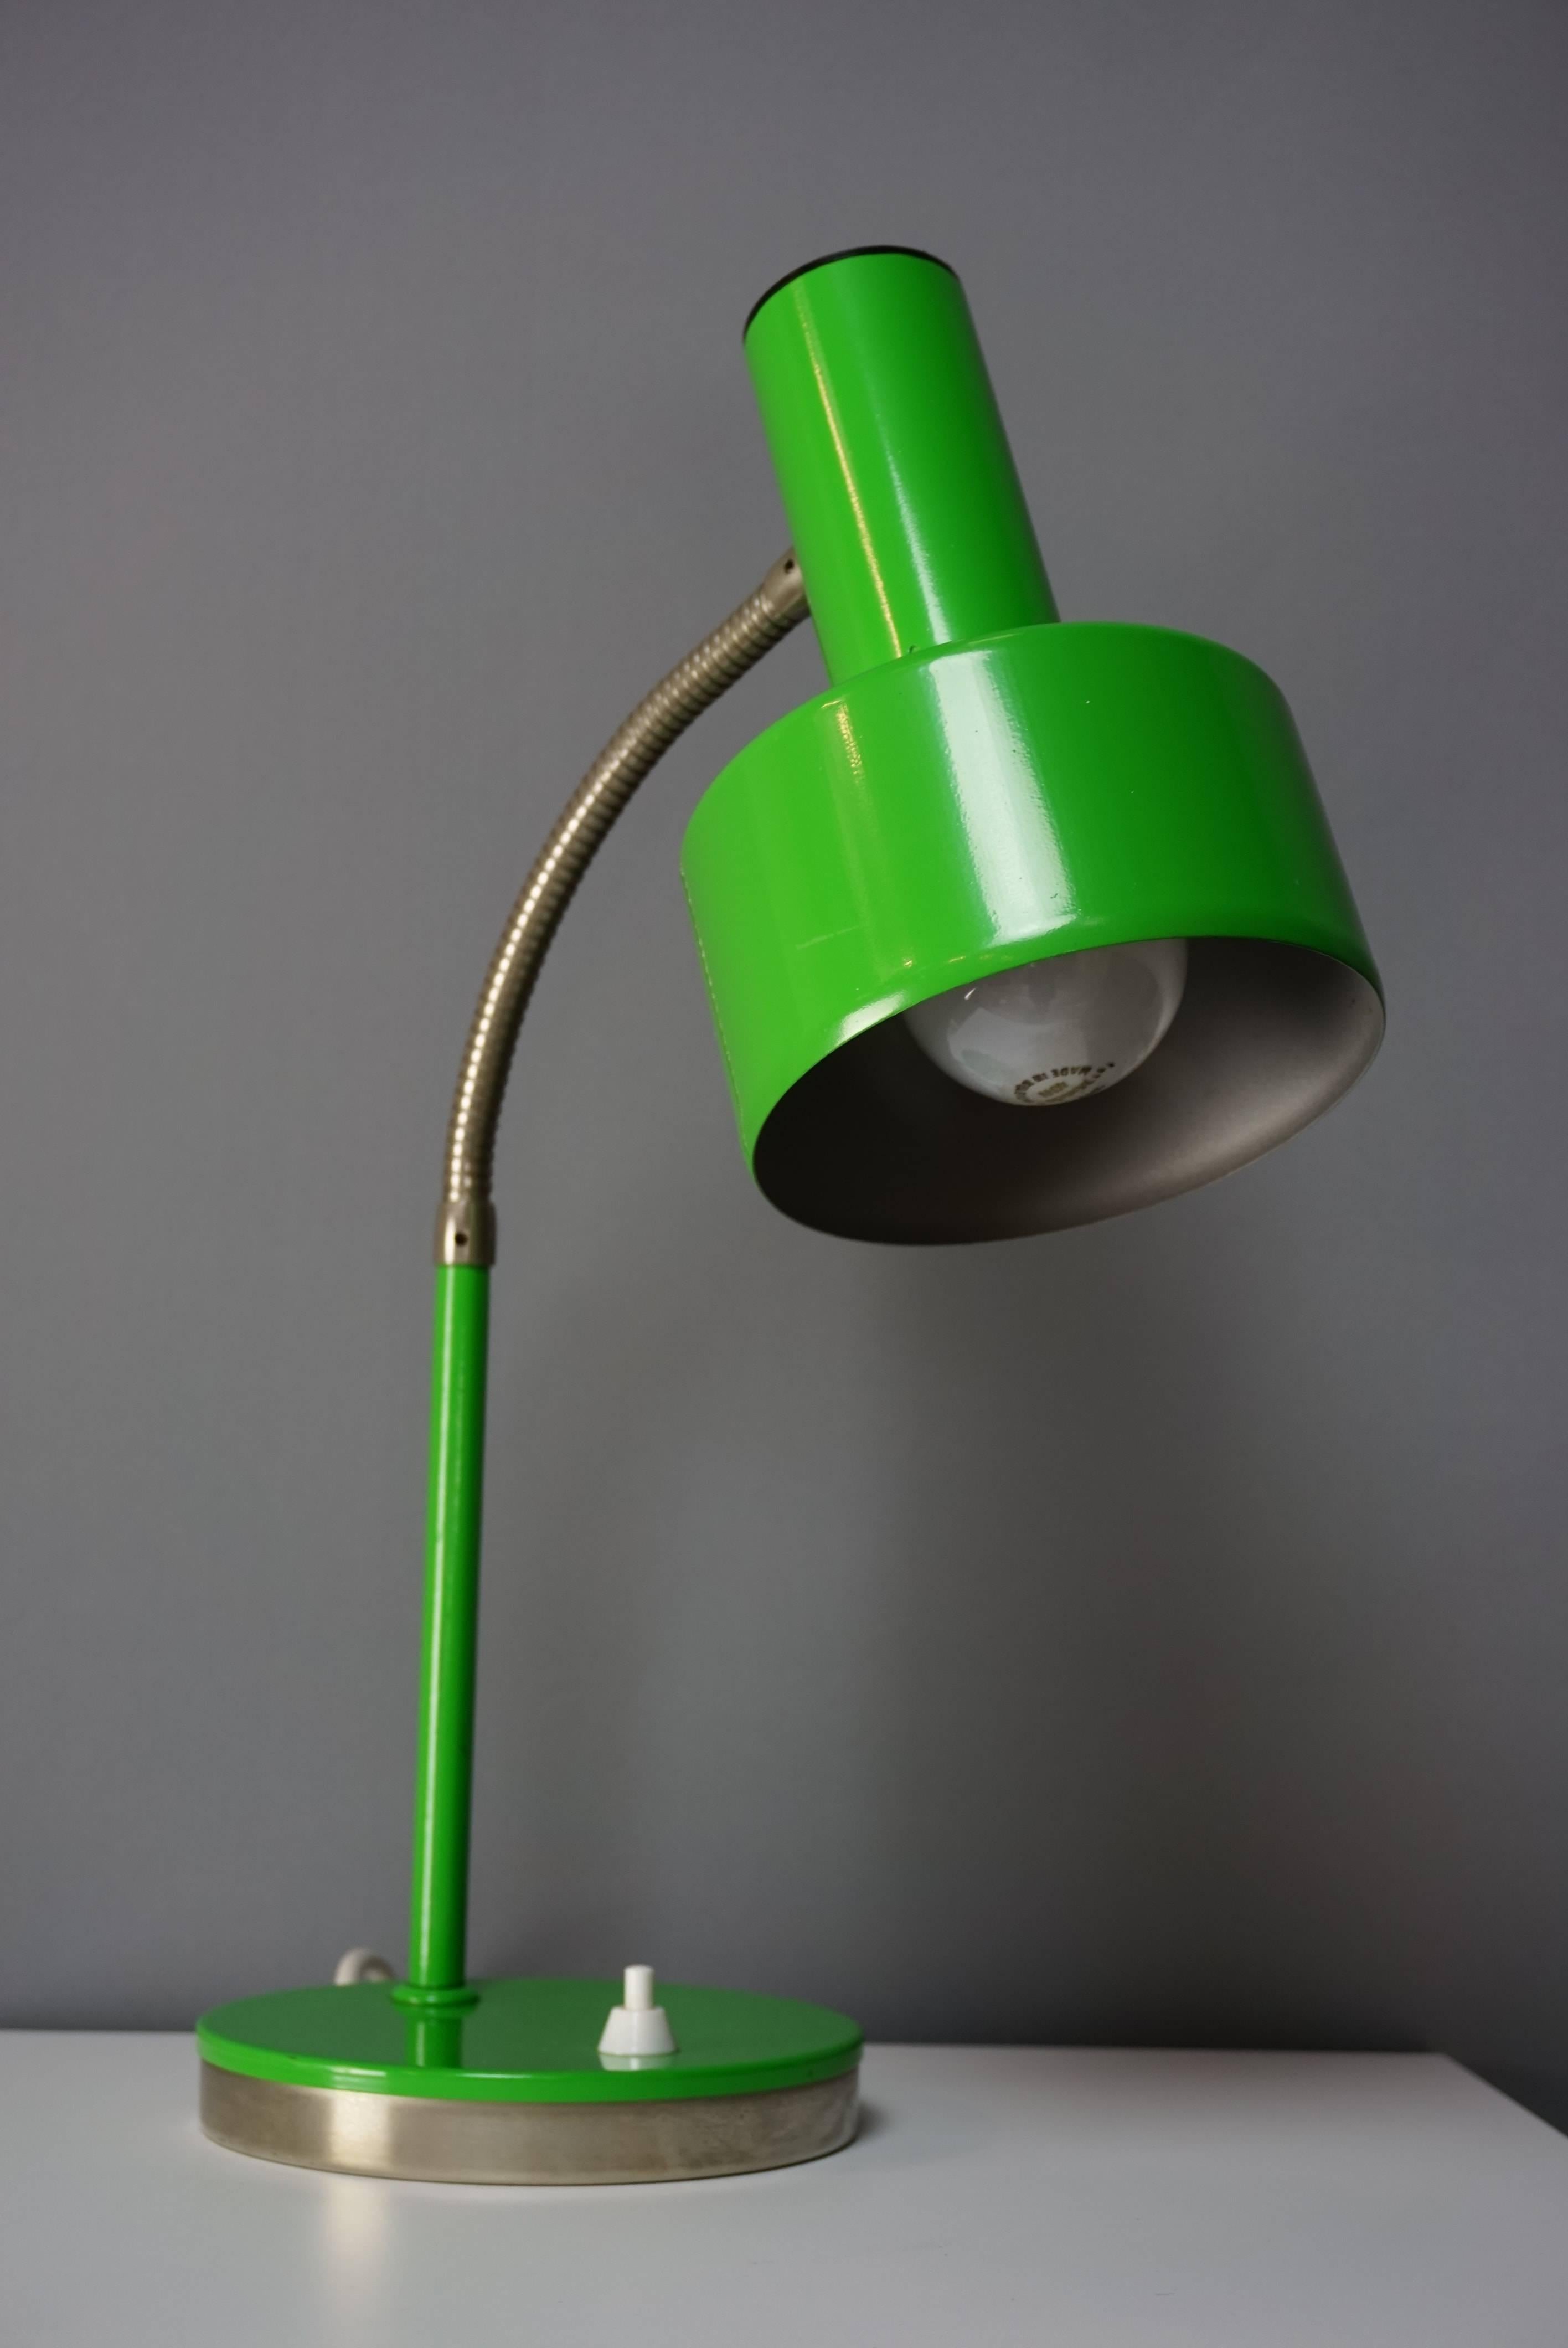 Articulated 1960s lamp made entirely of chromed metal and electric green pop, neon and vintage!